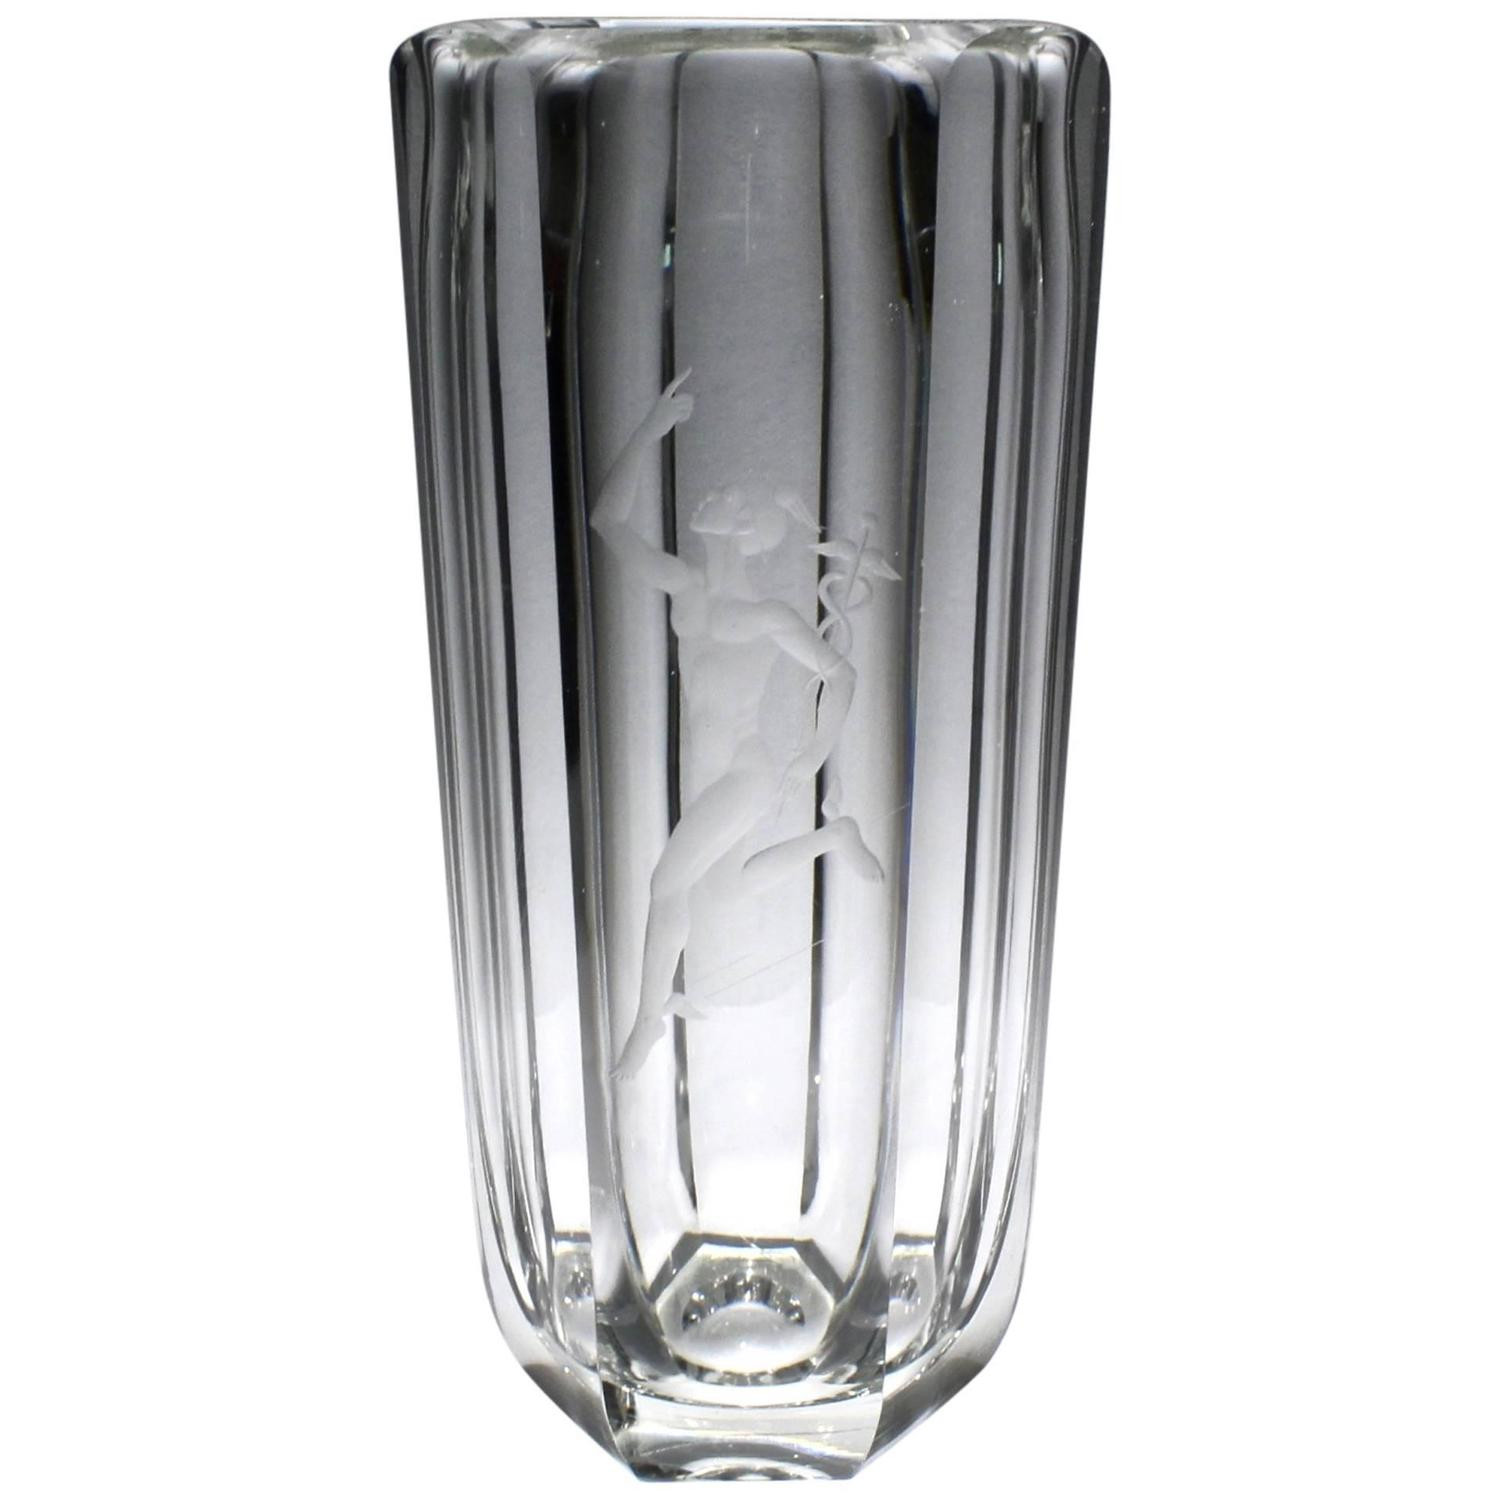 22 Famous Kosta Boda Glass Vase 2022 free download kosta boda glass vase of kosta boda the clear sticker now used today with a san serif in large faceted art deco vase with engraved mercury by elis bergh for kosta boda